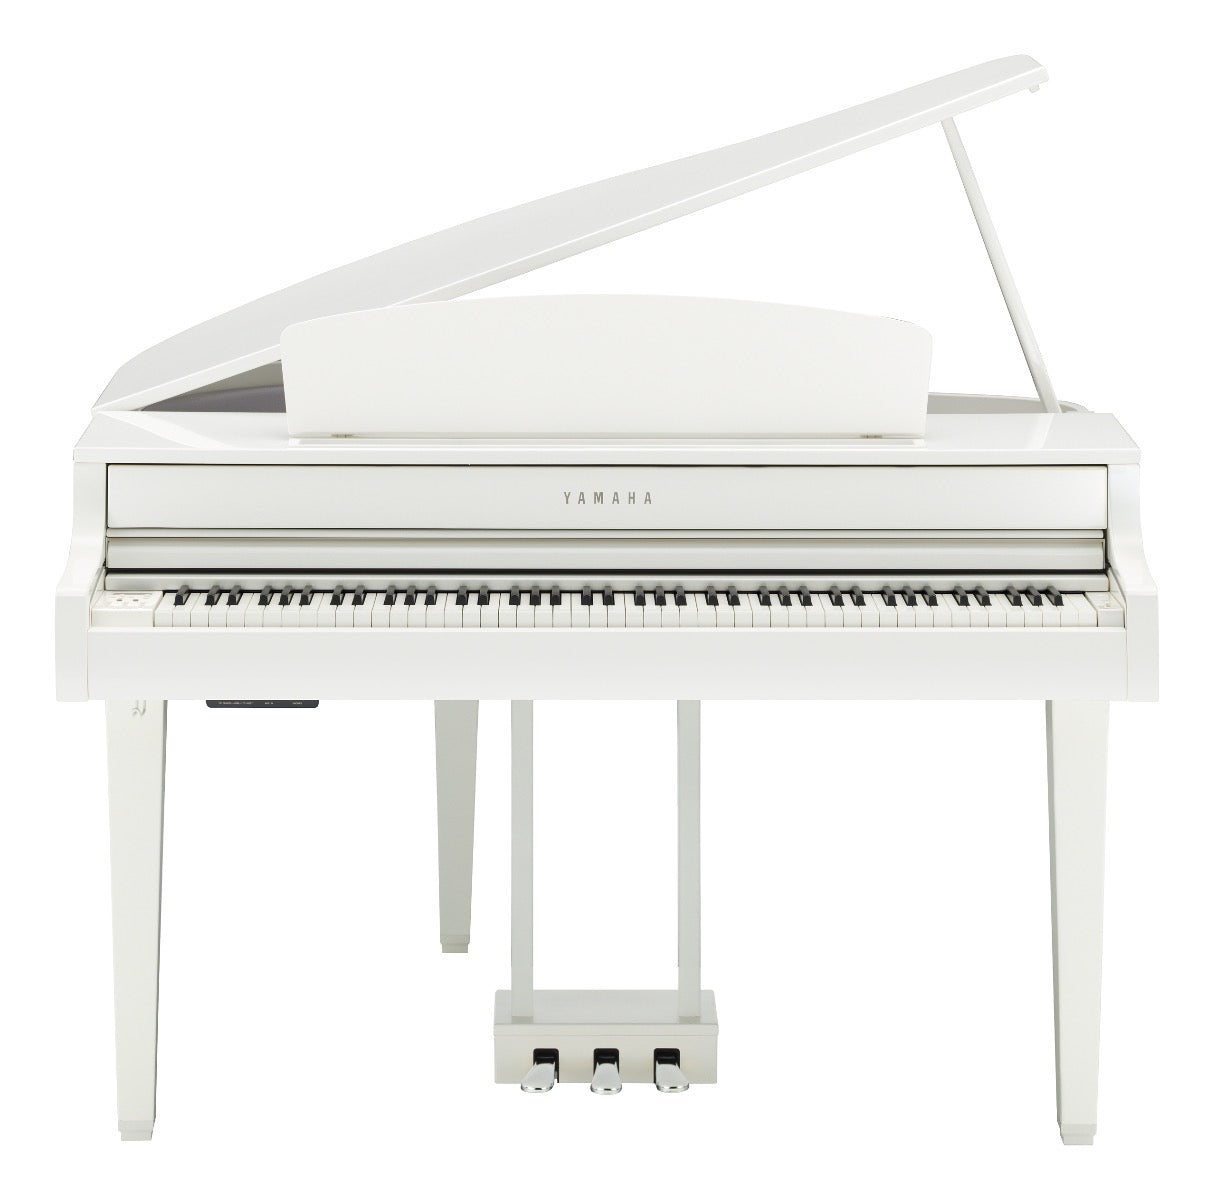 Perspective view of Yamaha Clavinova CLP-765GP Digital Piano - Polished White showing front and top